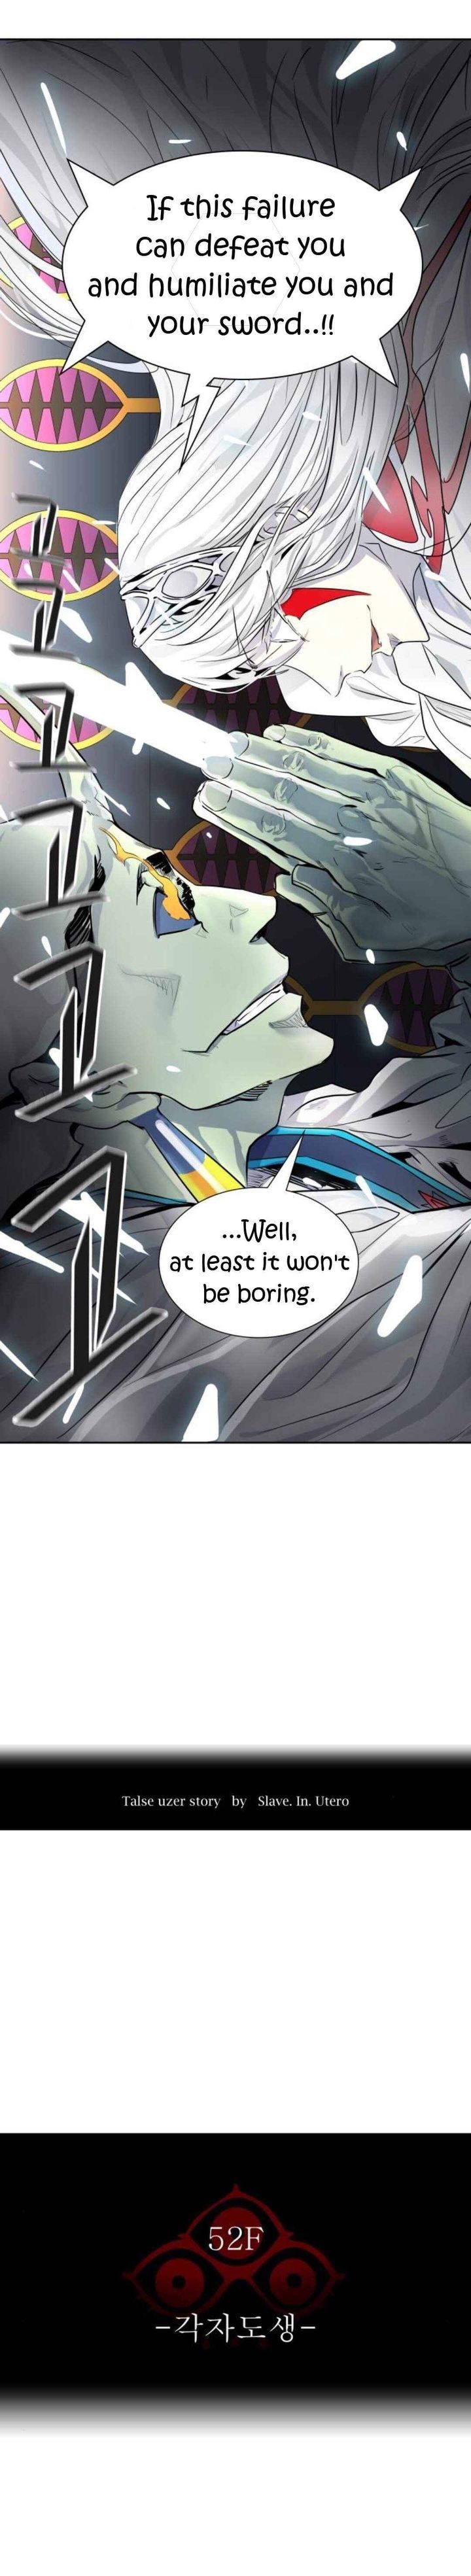 Tower Of God Chapter 488 Page 3